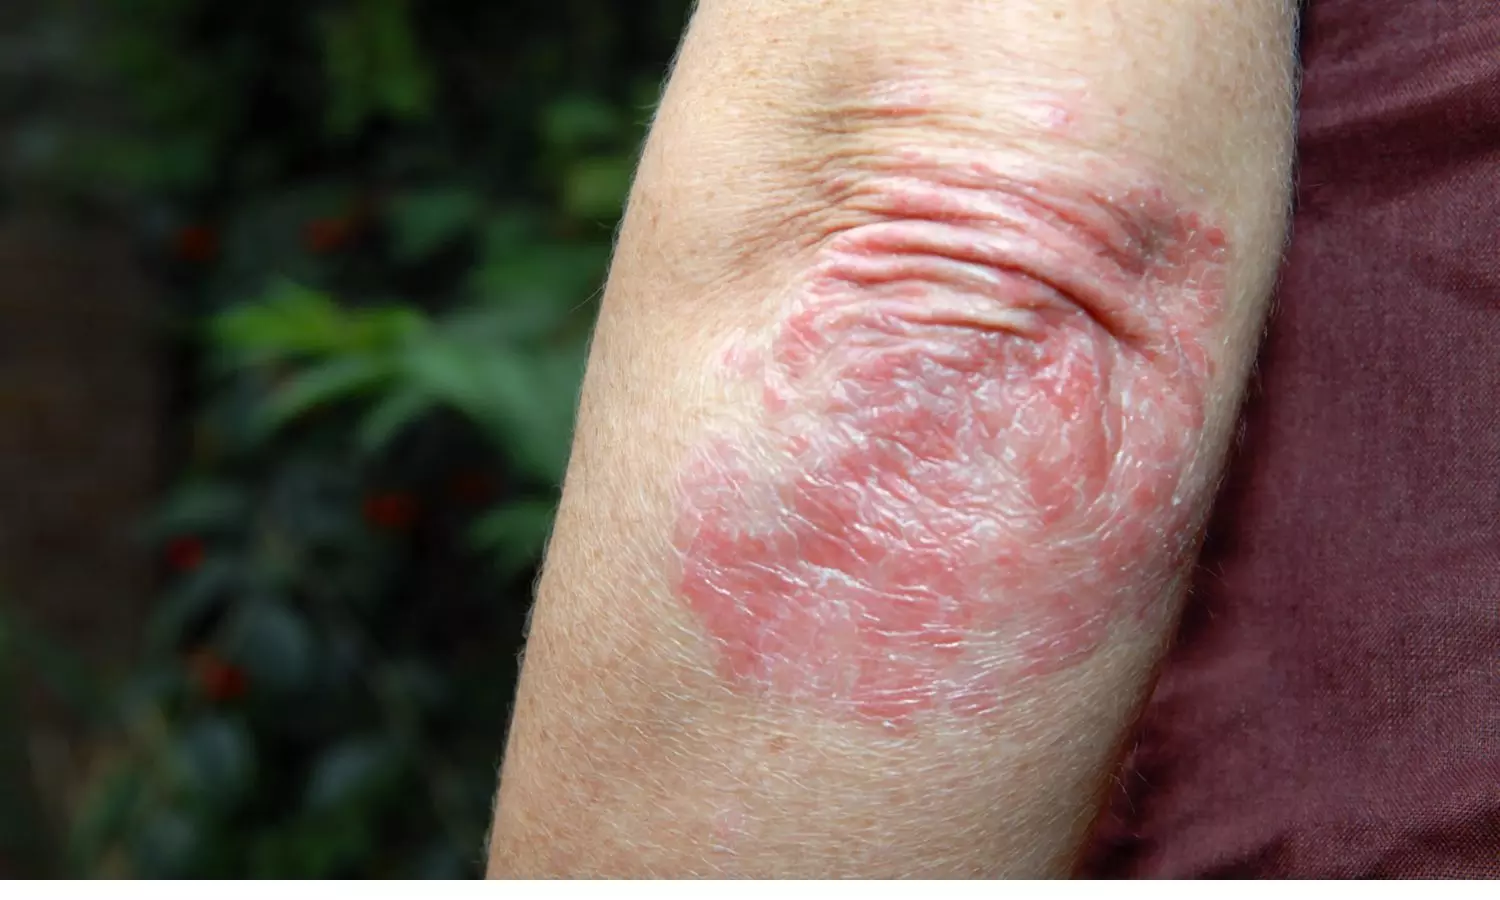 Mirikizumab efficacy to placebo for treating moderate-to-severe plaque psoriasis